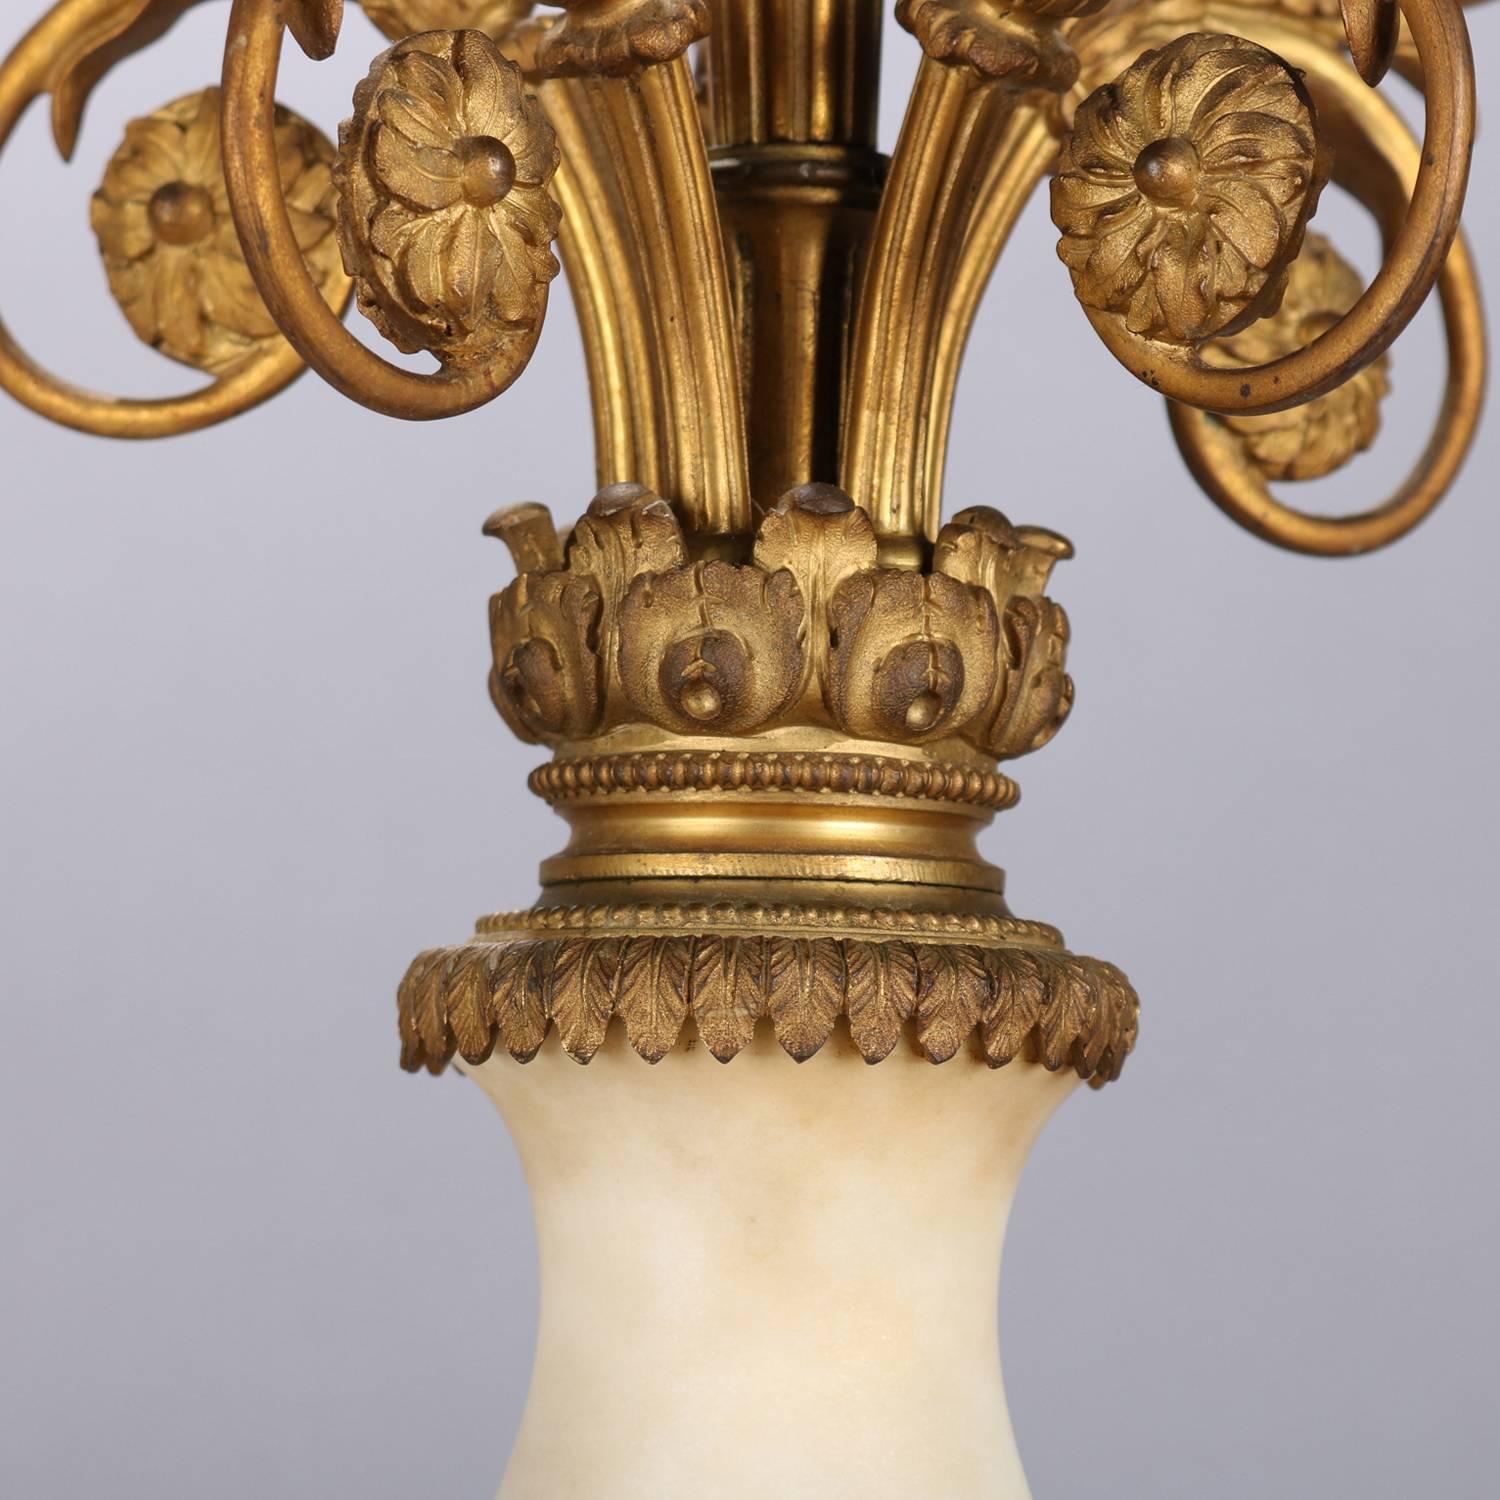 19th Century Oversized French Classical Urn Form Marble and Gilt Bronze Candelabras